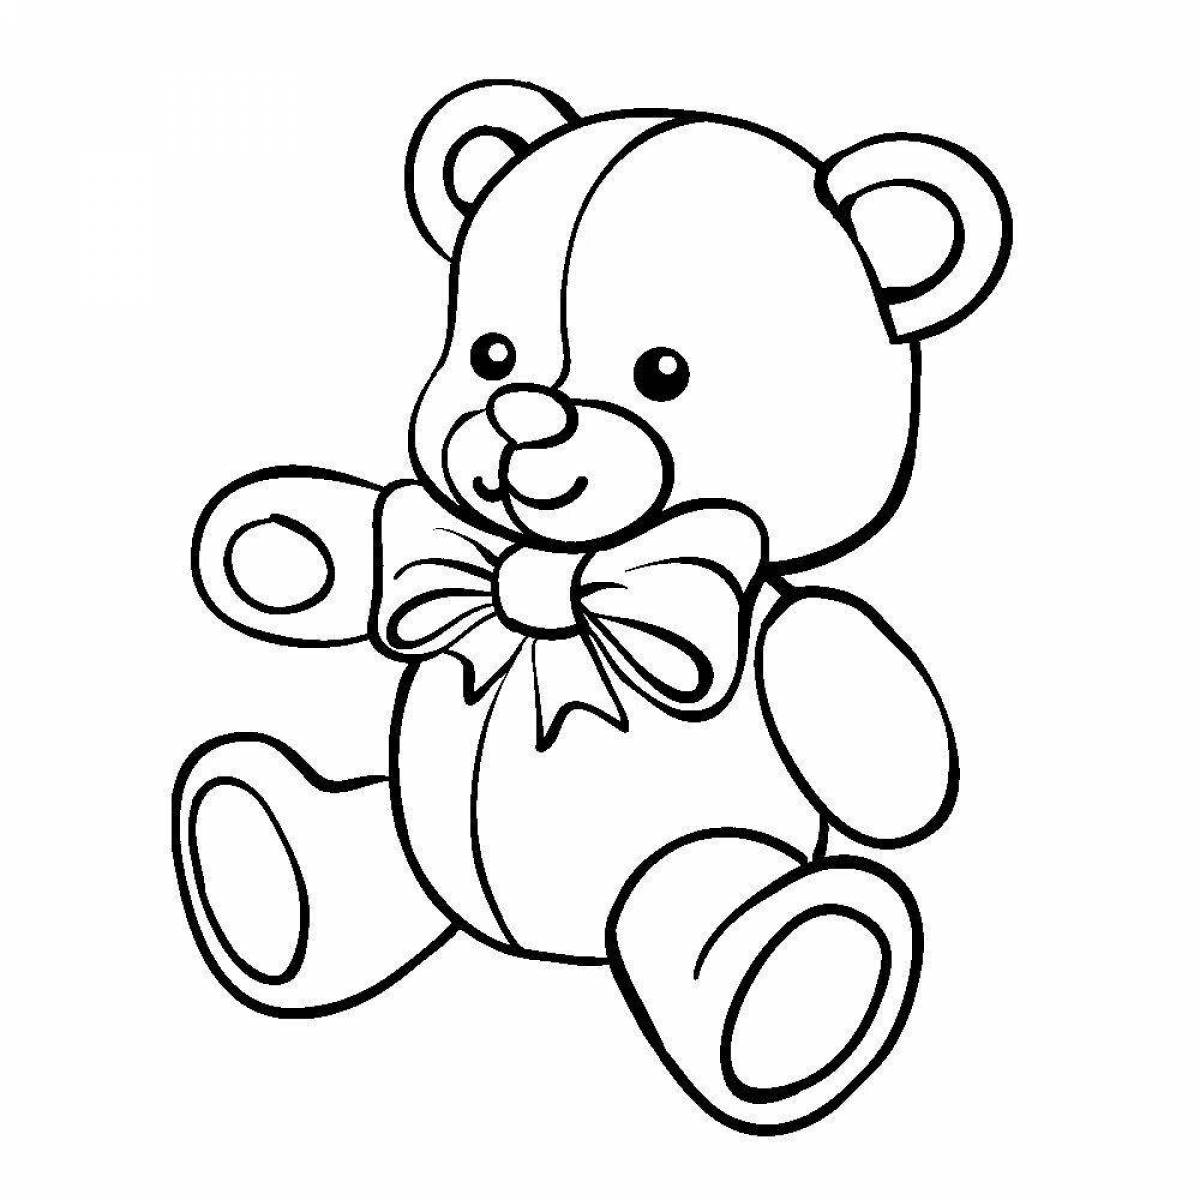 Animated teddy bear coloring page for kids